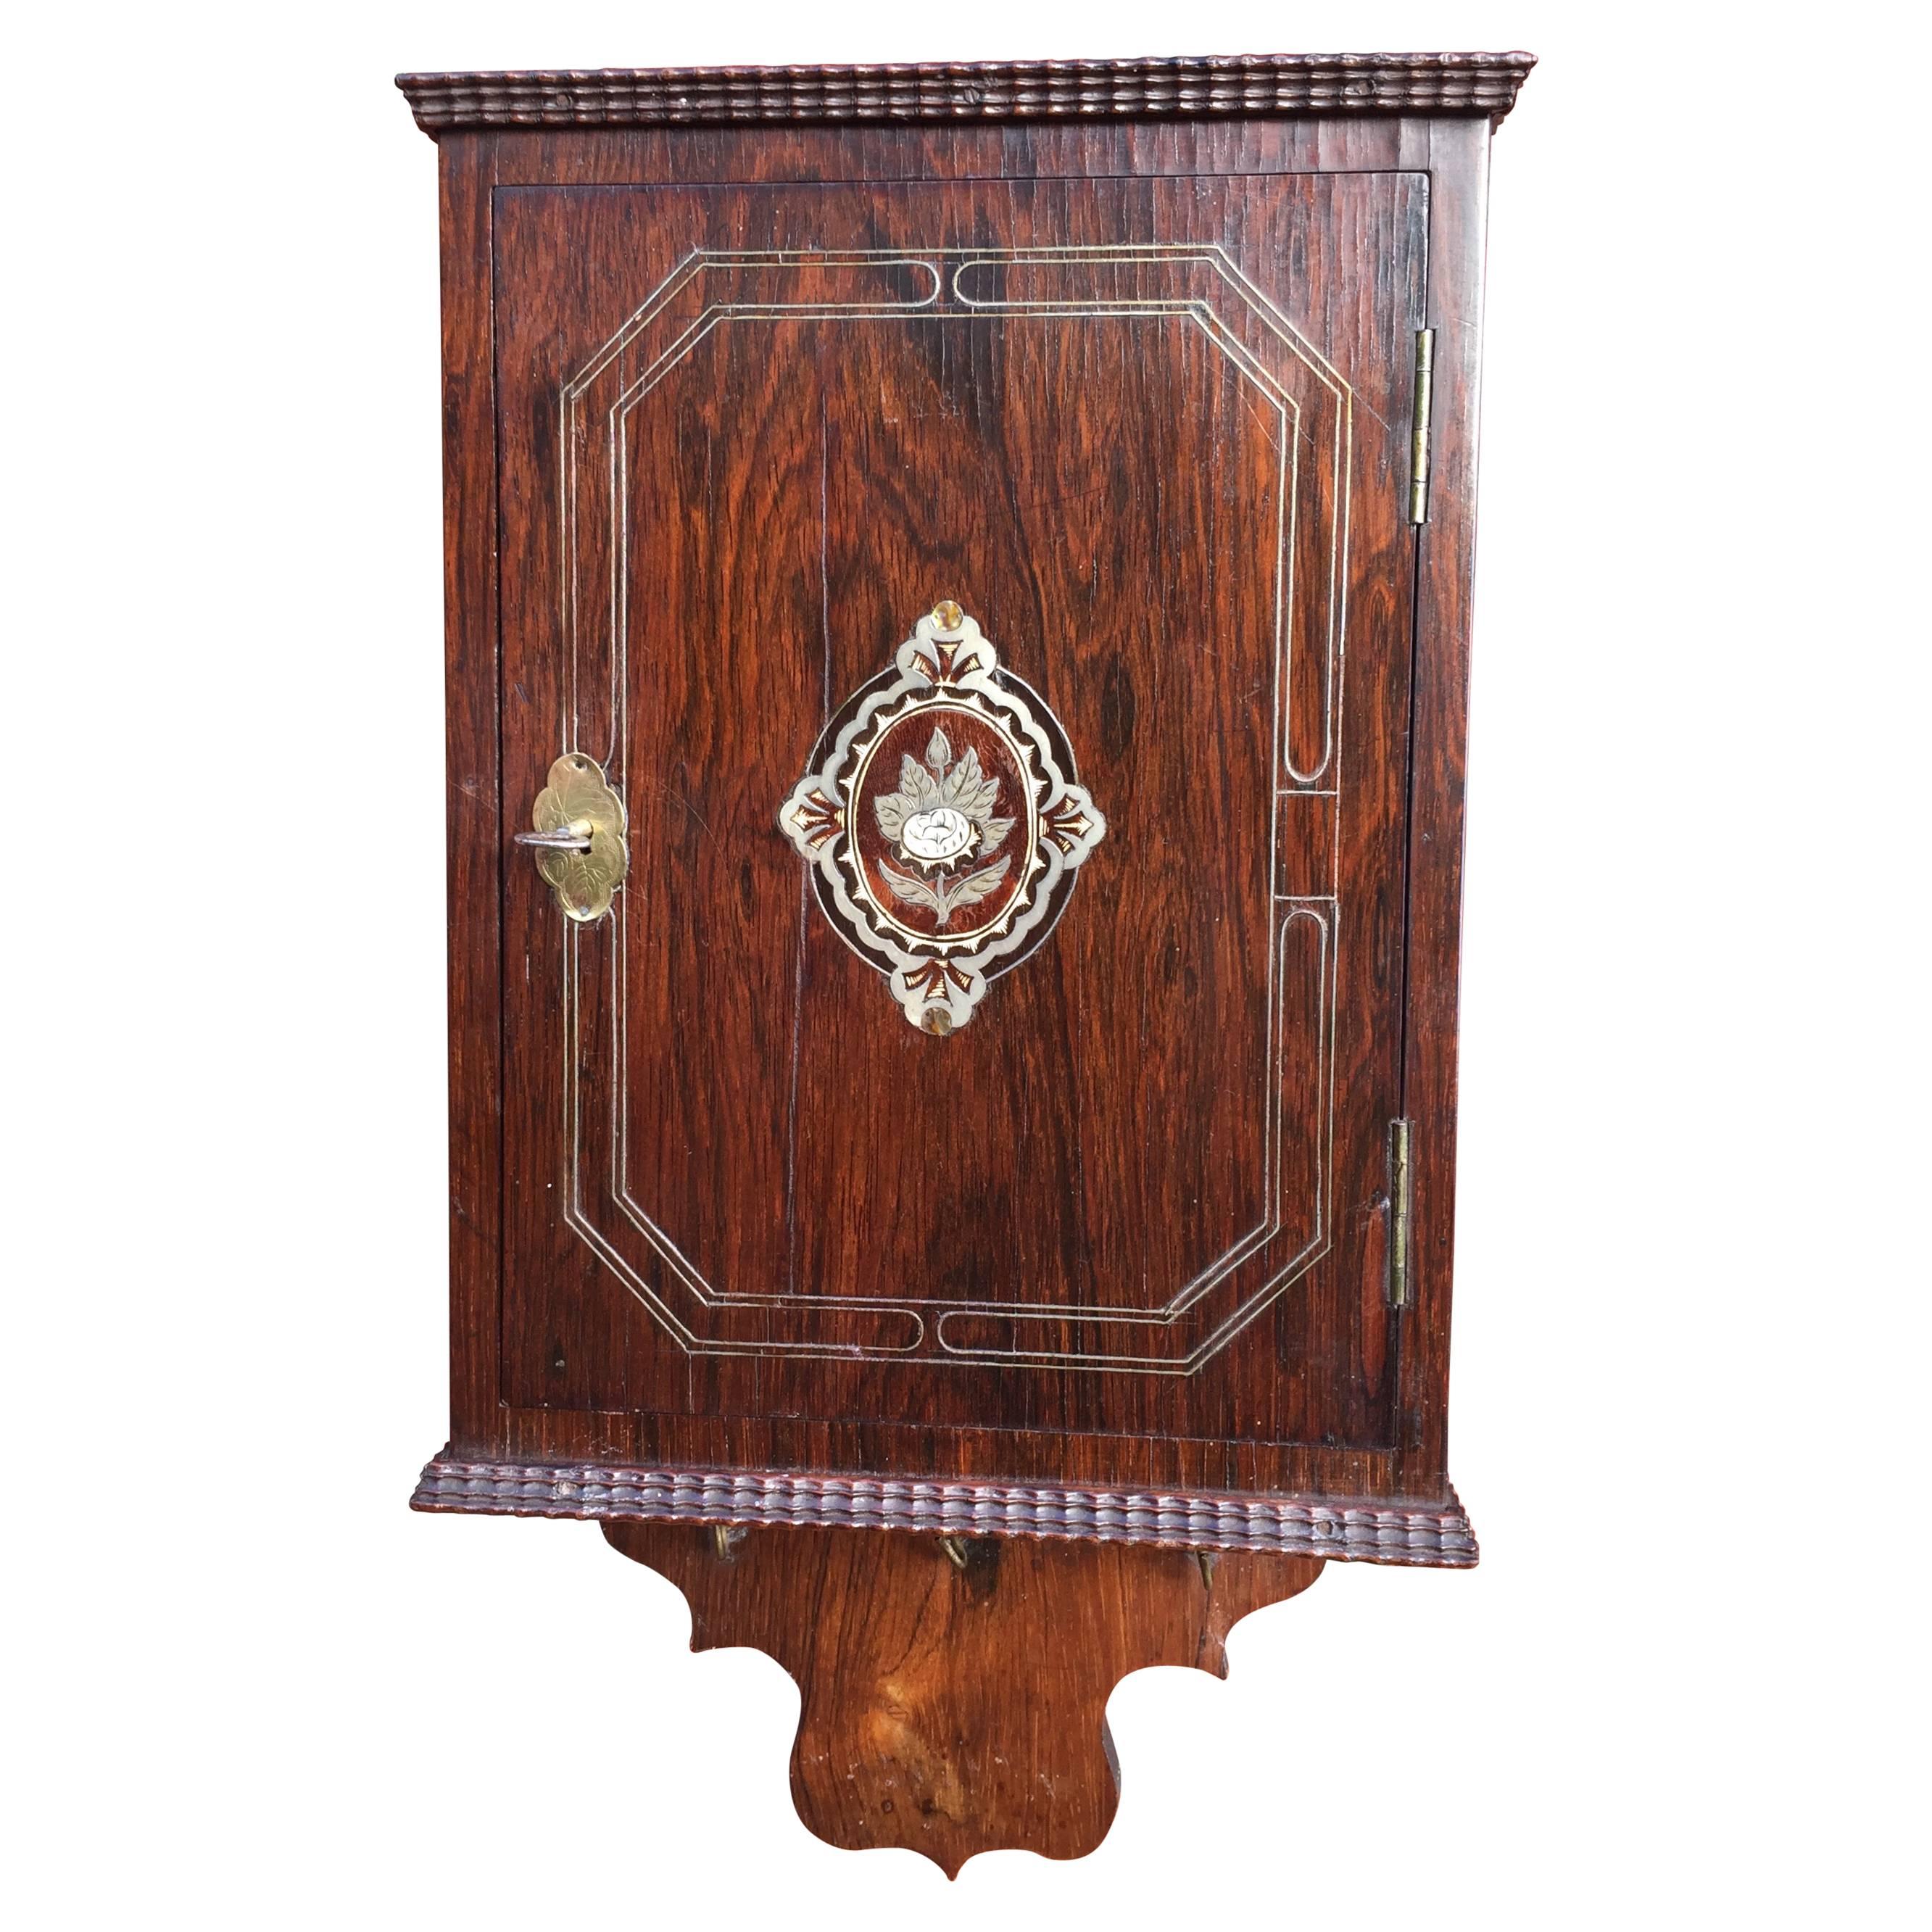 19th Century Mother-of-Pearl Inlaid Coromandel Key Rack Holder / Wall Cabinet